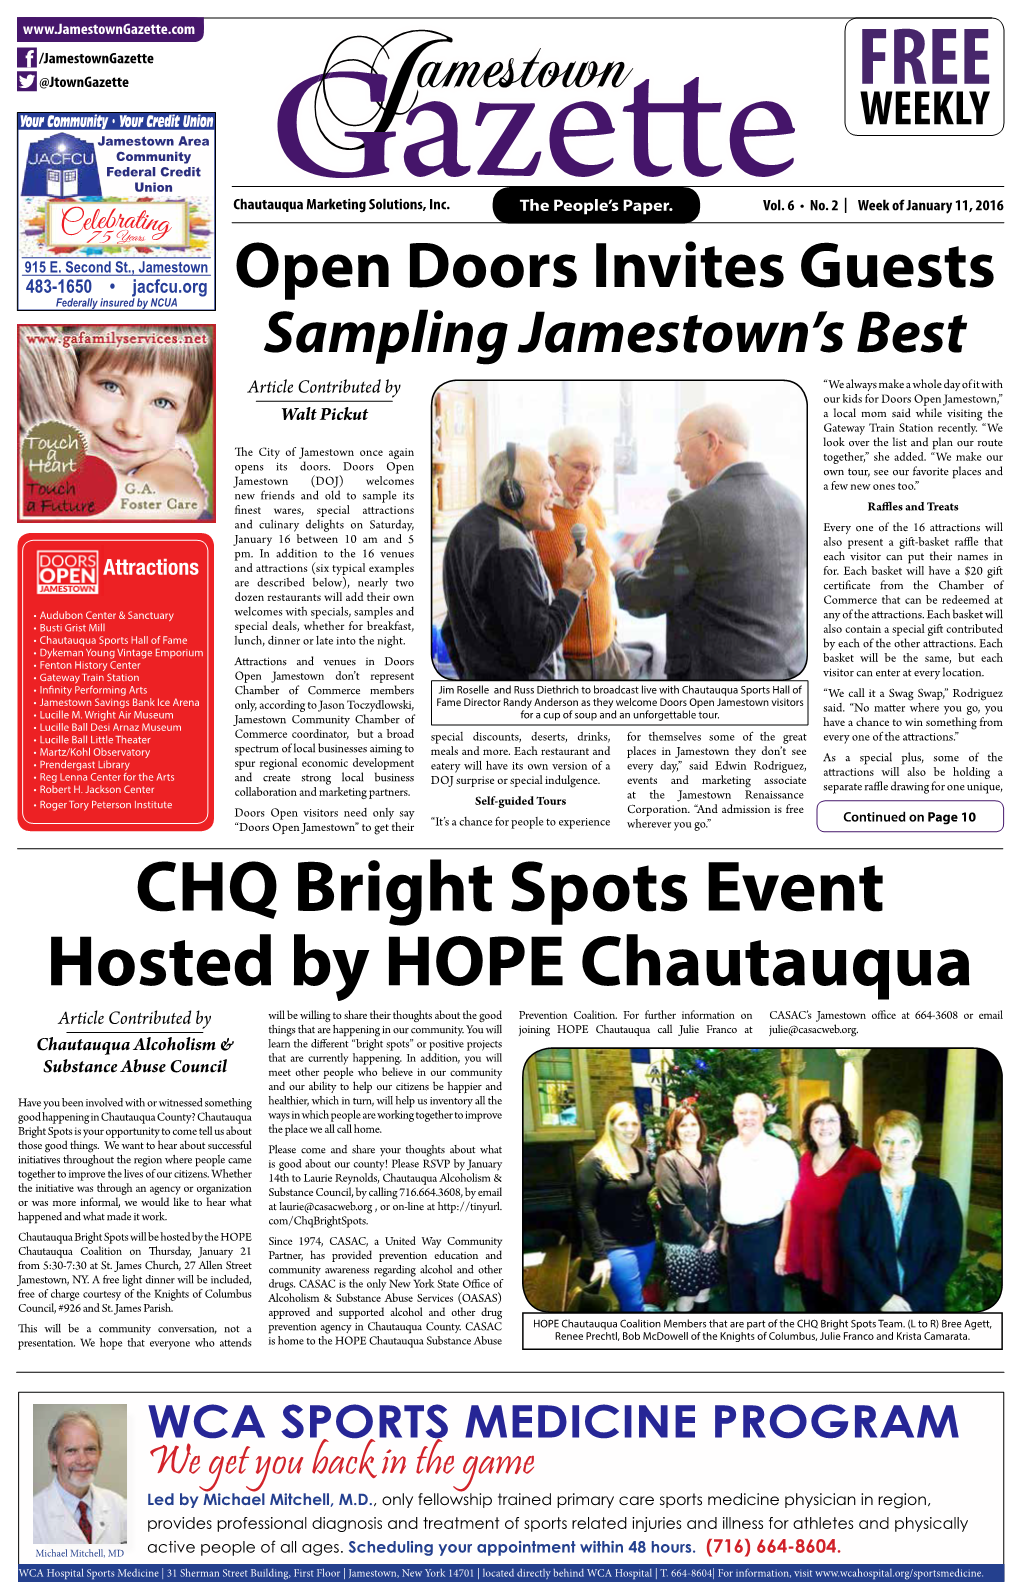 CHQ Bright Spots Event Hosted by HOPE Chautauqua Article Contributed by Will Be Willing to Share Their Thoughts About the Good Prevention Coalition